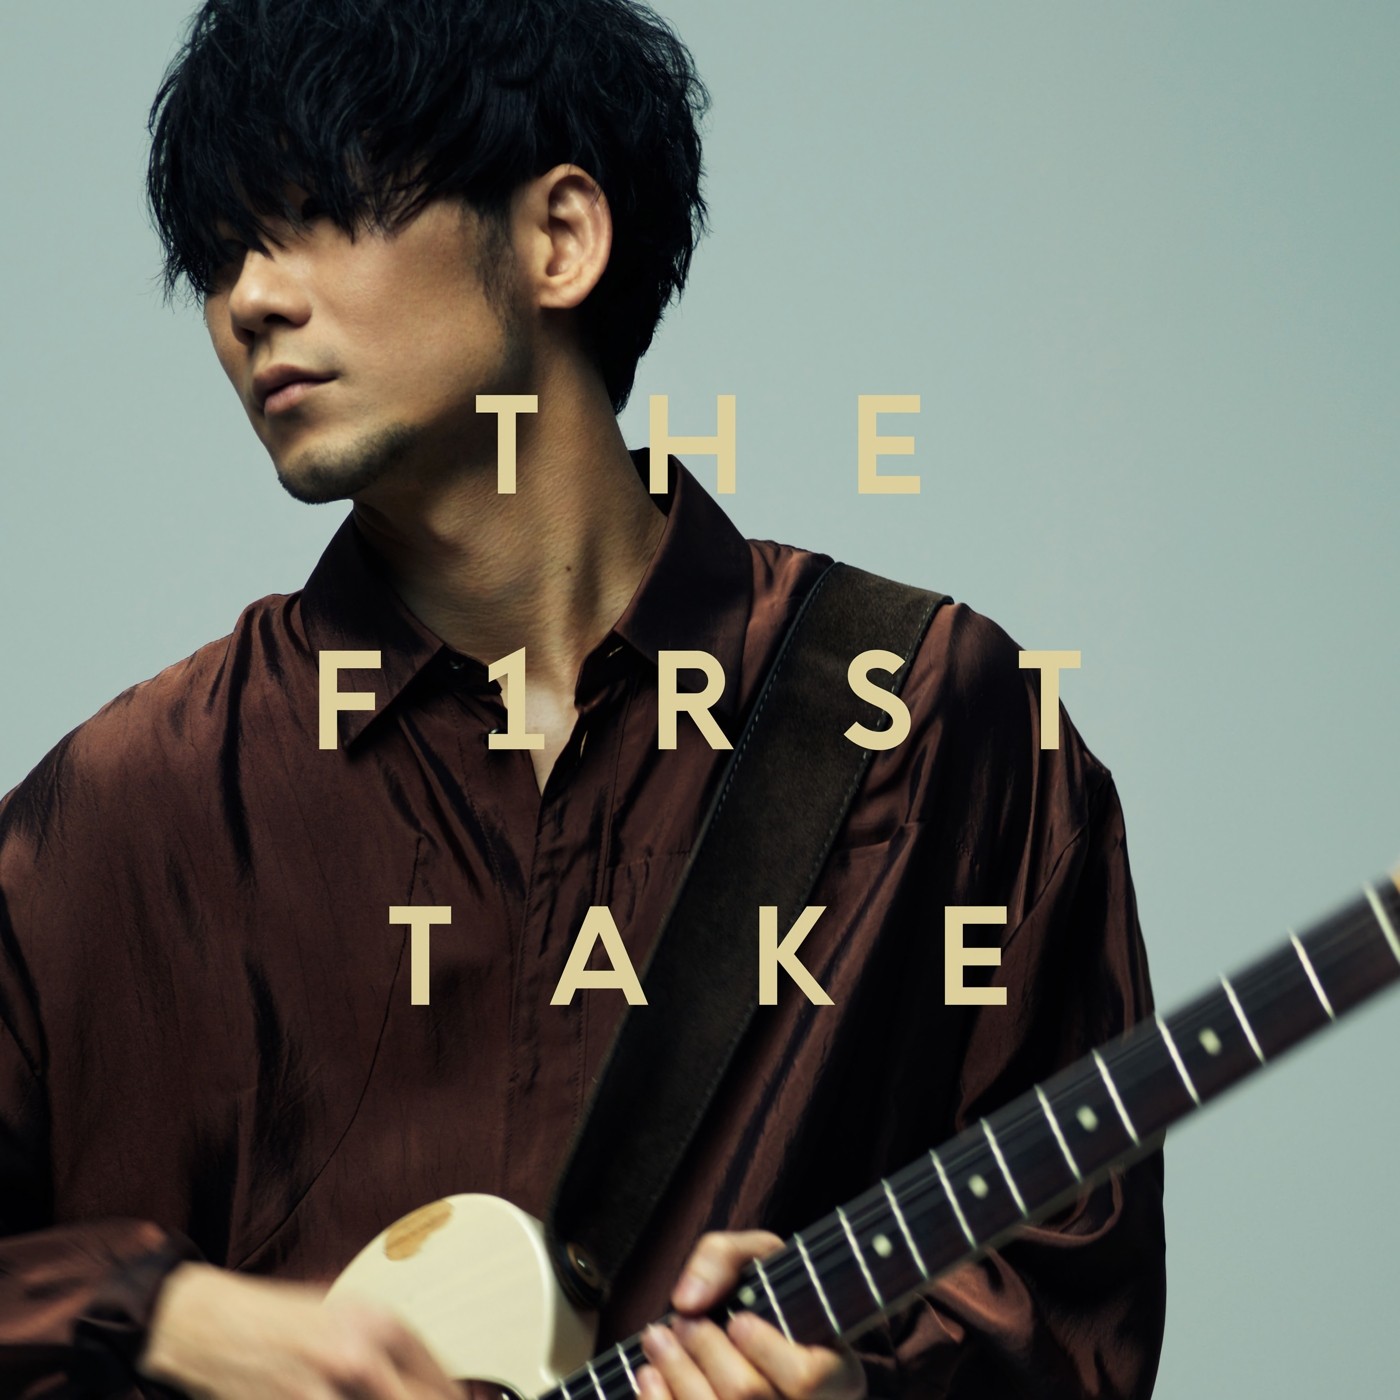 TK from 凛として時雨 - copy light – From THE FIRST TAKE [FLAC 24bit/96kHz]